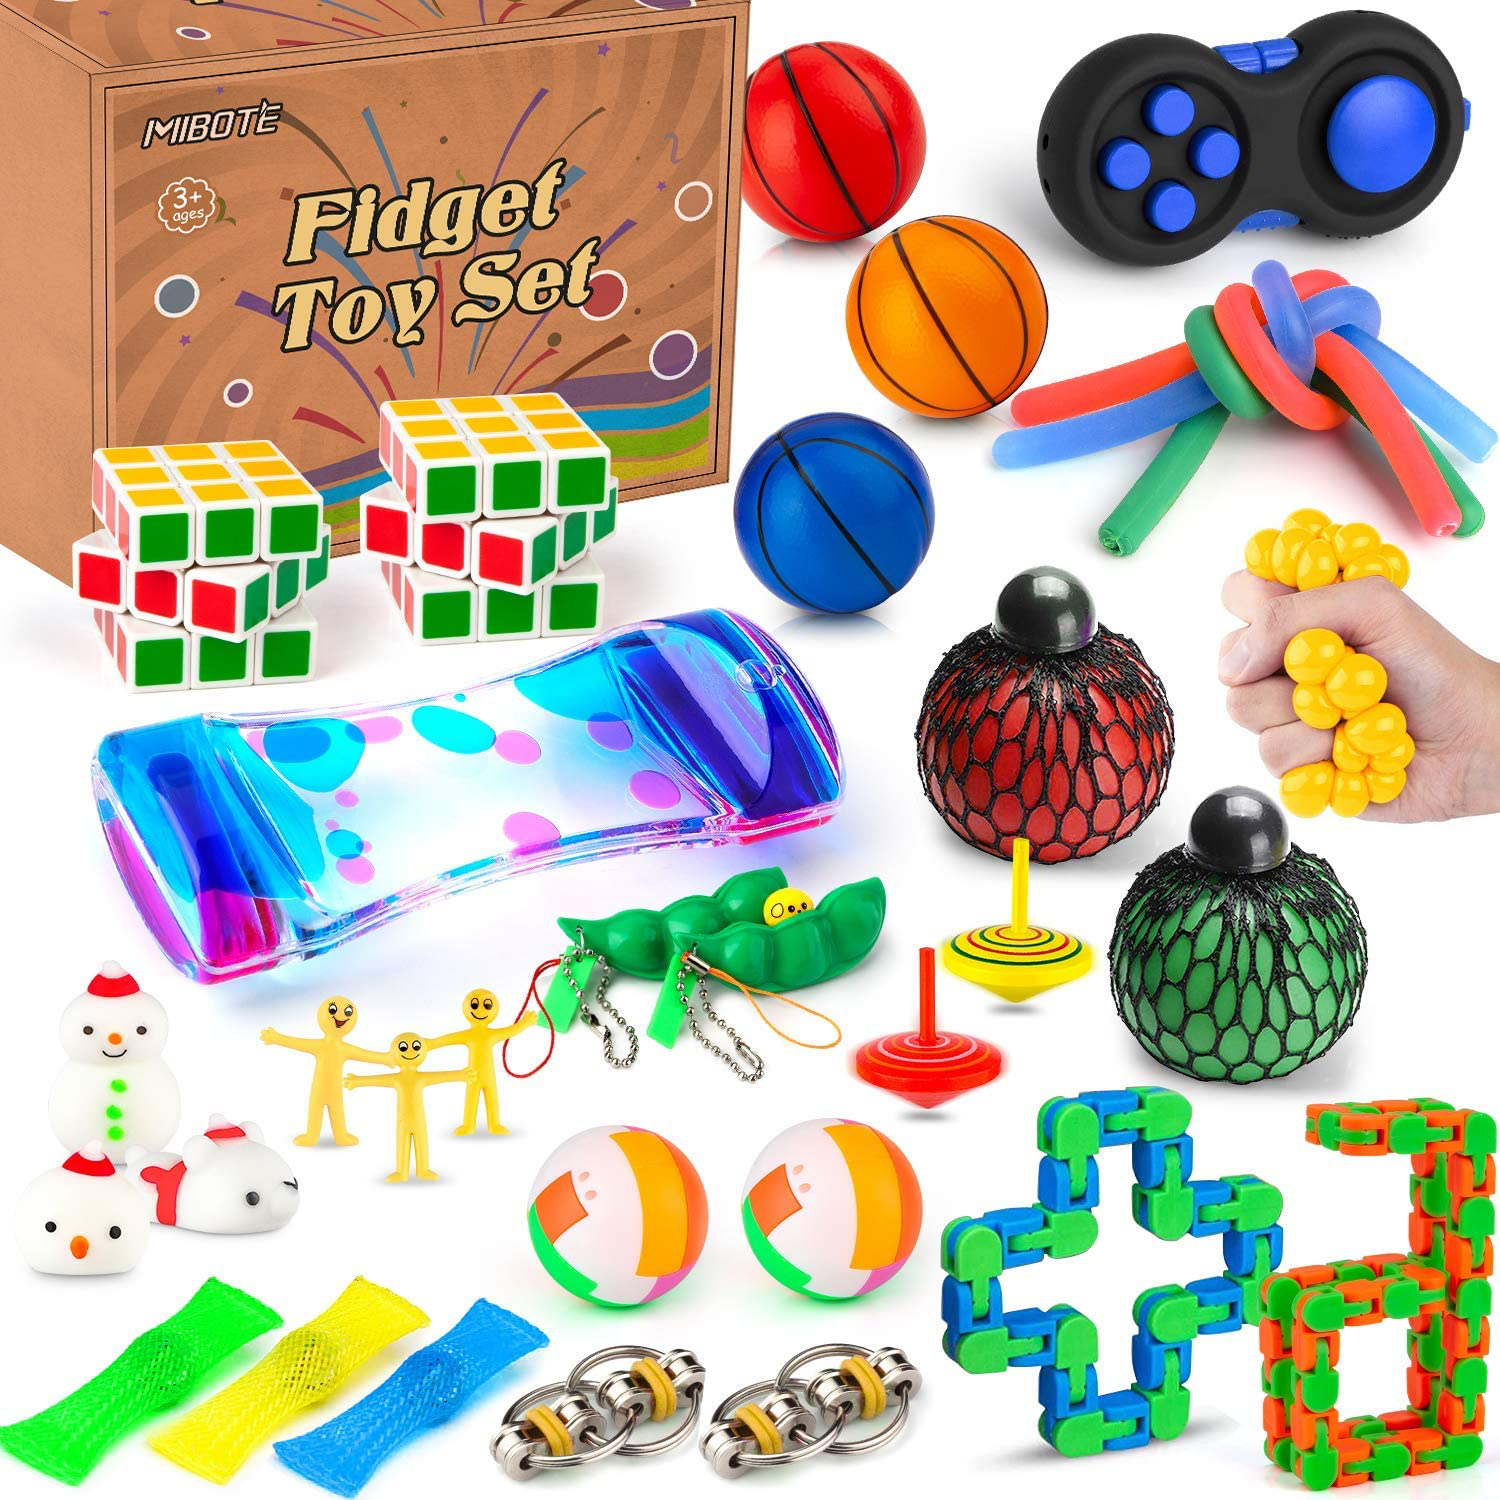 34 Pcs Fidget Toys Set, Sensory Fidget Toys Bundle for Kids/Adults Stress Relief and Anti-Anxiety Hand Toys